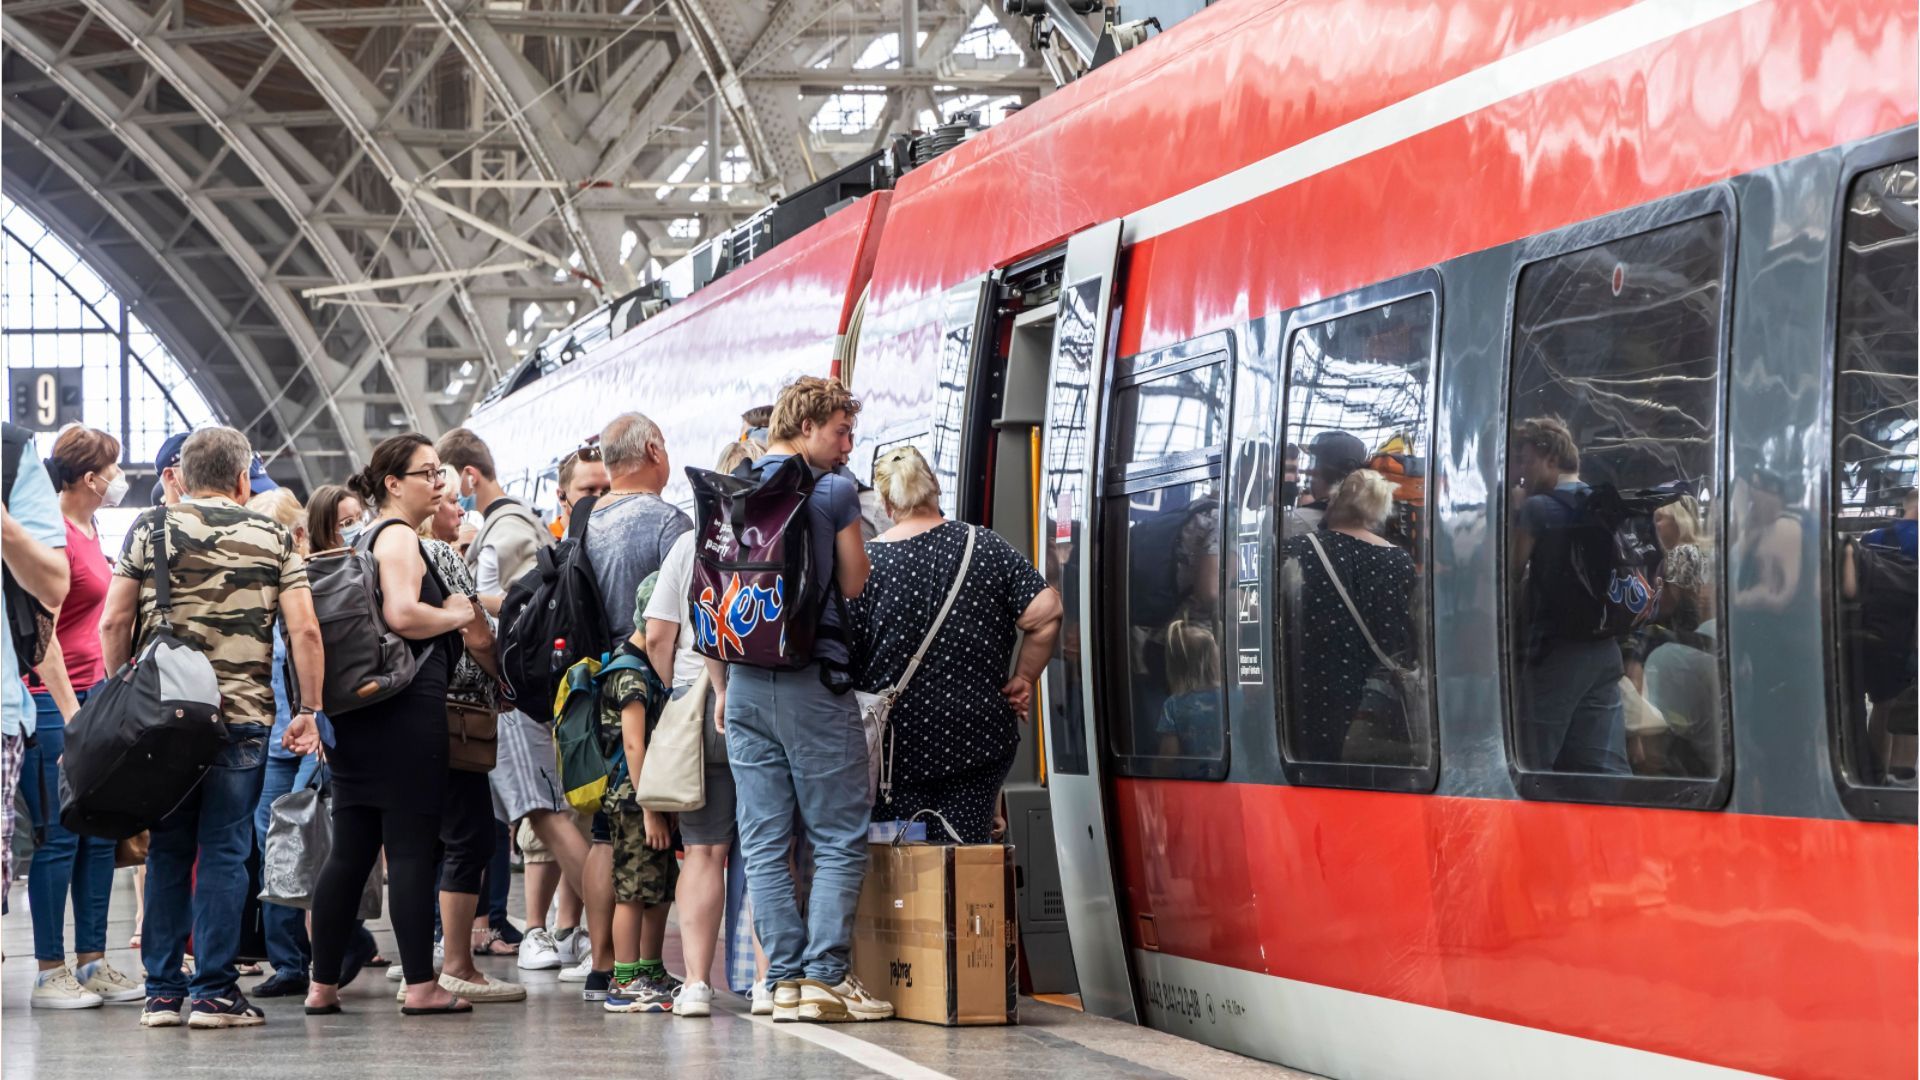 From December 11: Deutsche Bahn increases ticket prices for the Christmas season